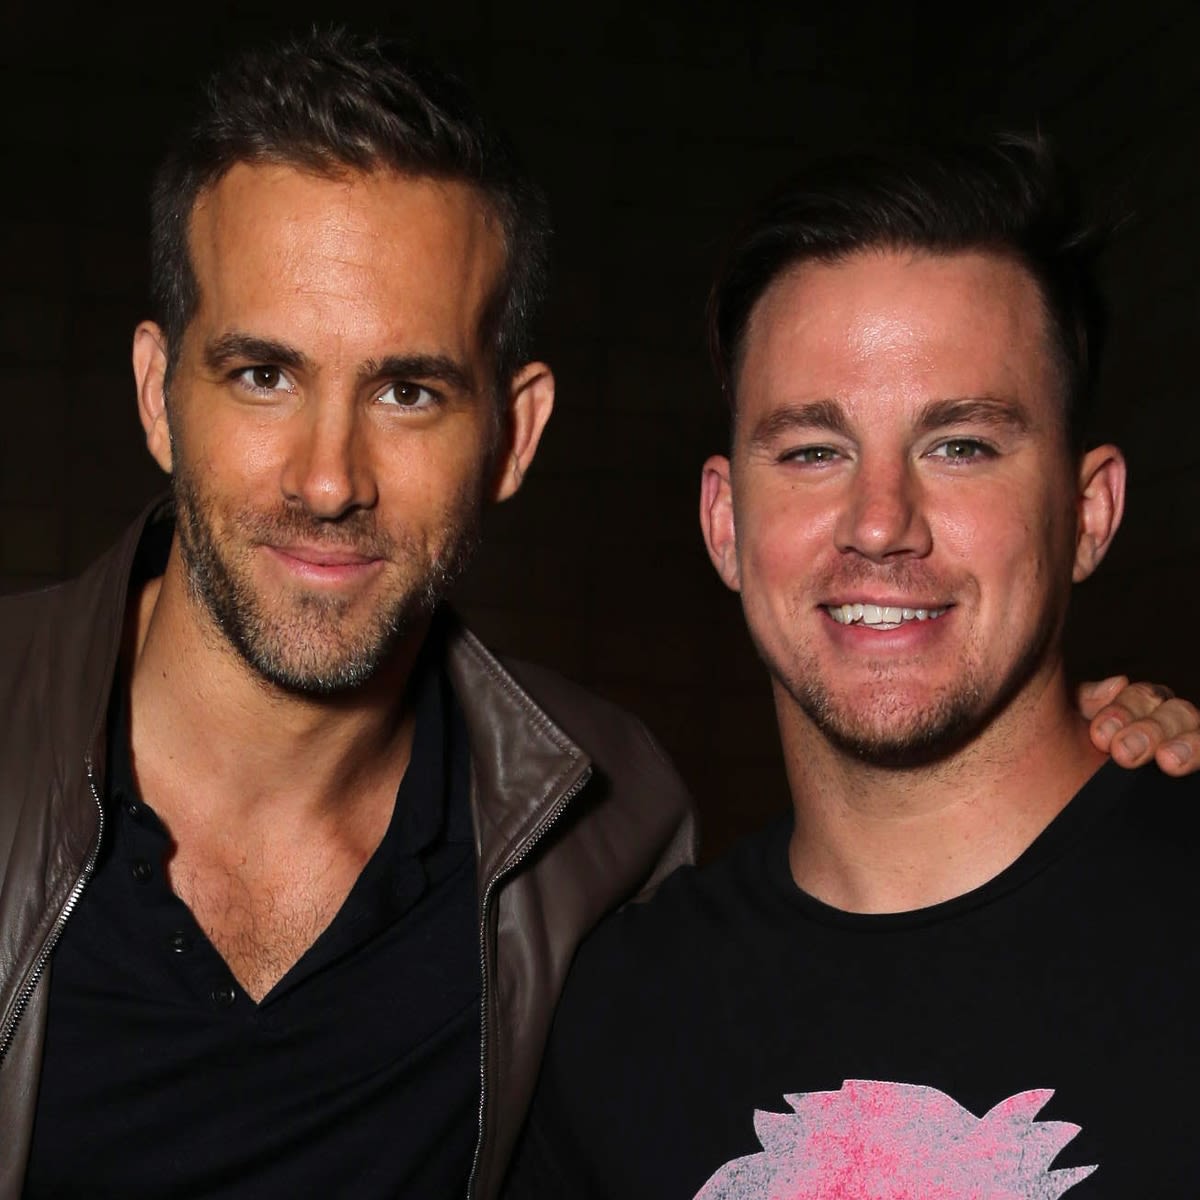 Channing Tatum Reveals How Ryan Reynolds "Fought" for Him in Tribute